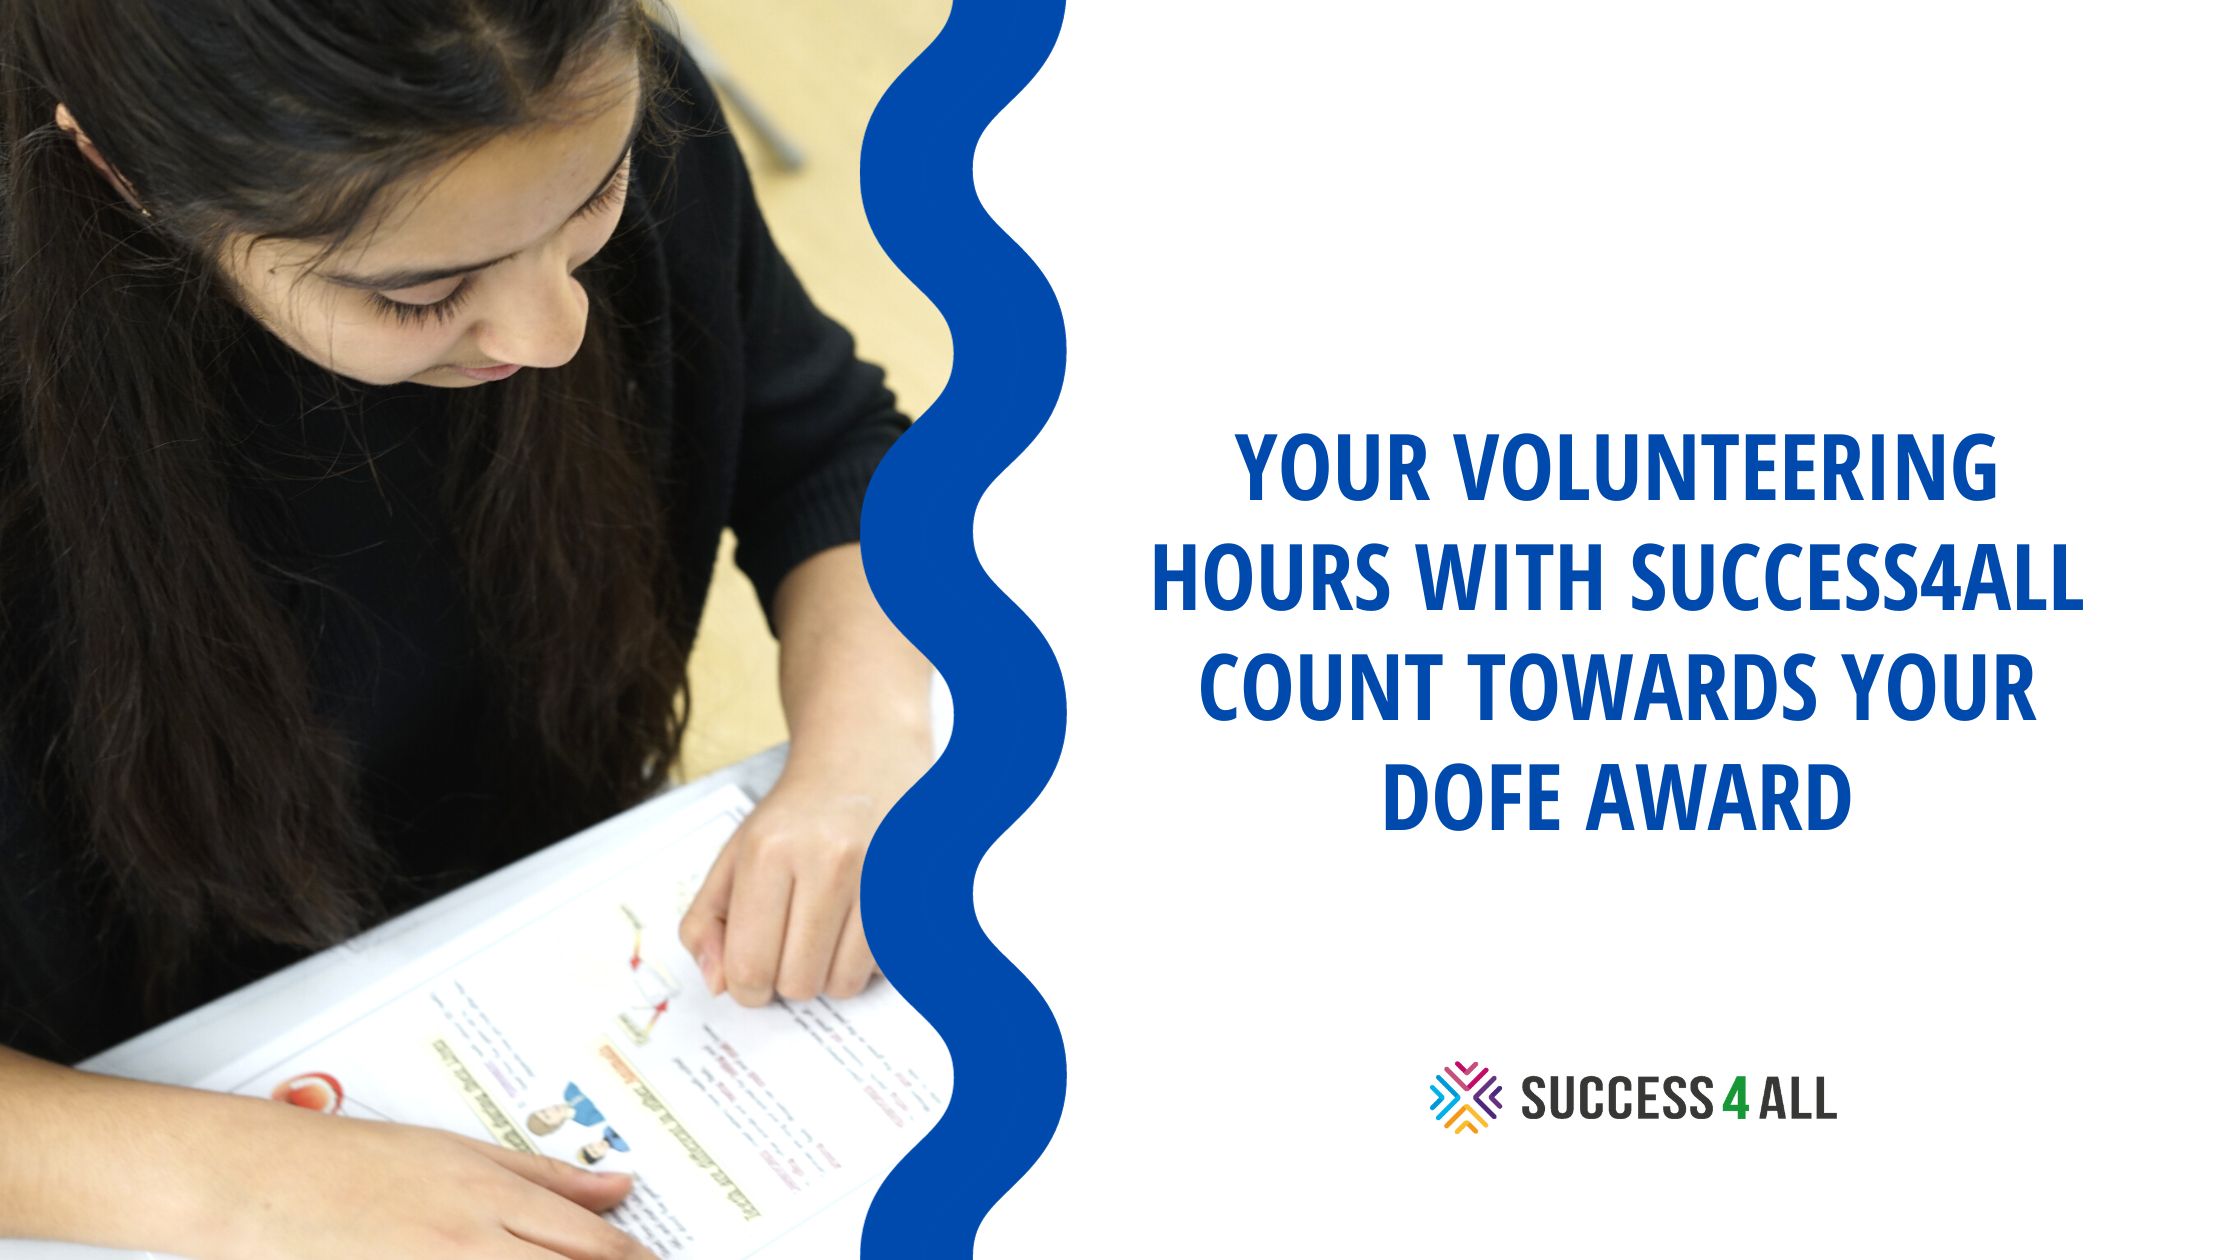 Your volunteering hours with Success4All count towards your DofE Award